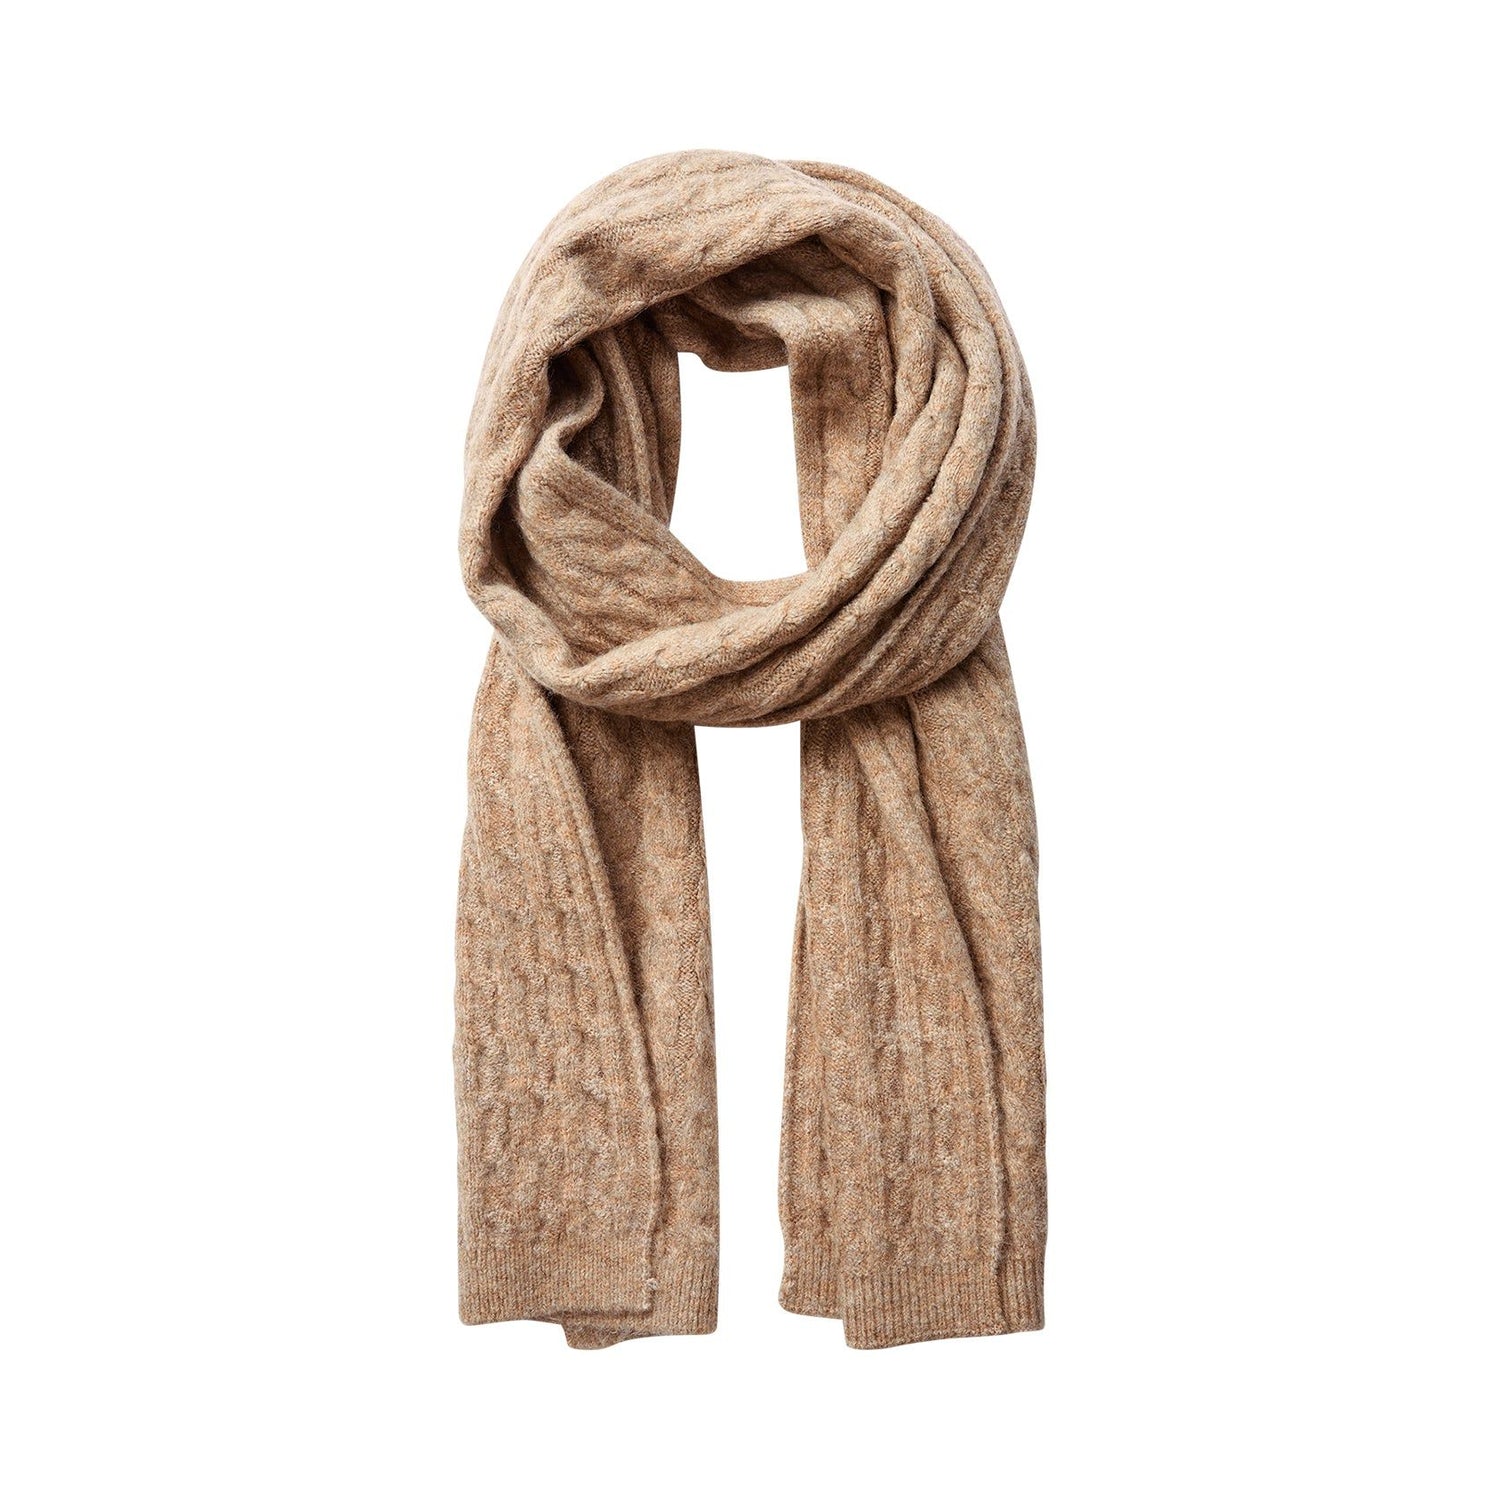 Tamana 2 Cable Scarf